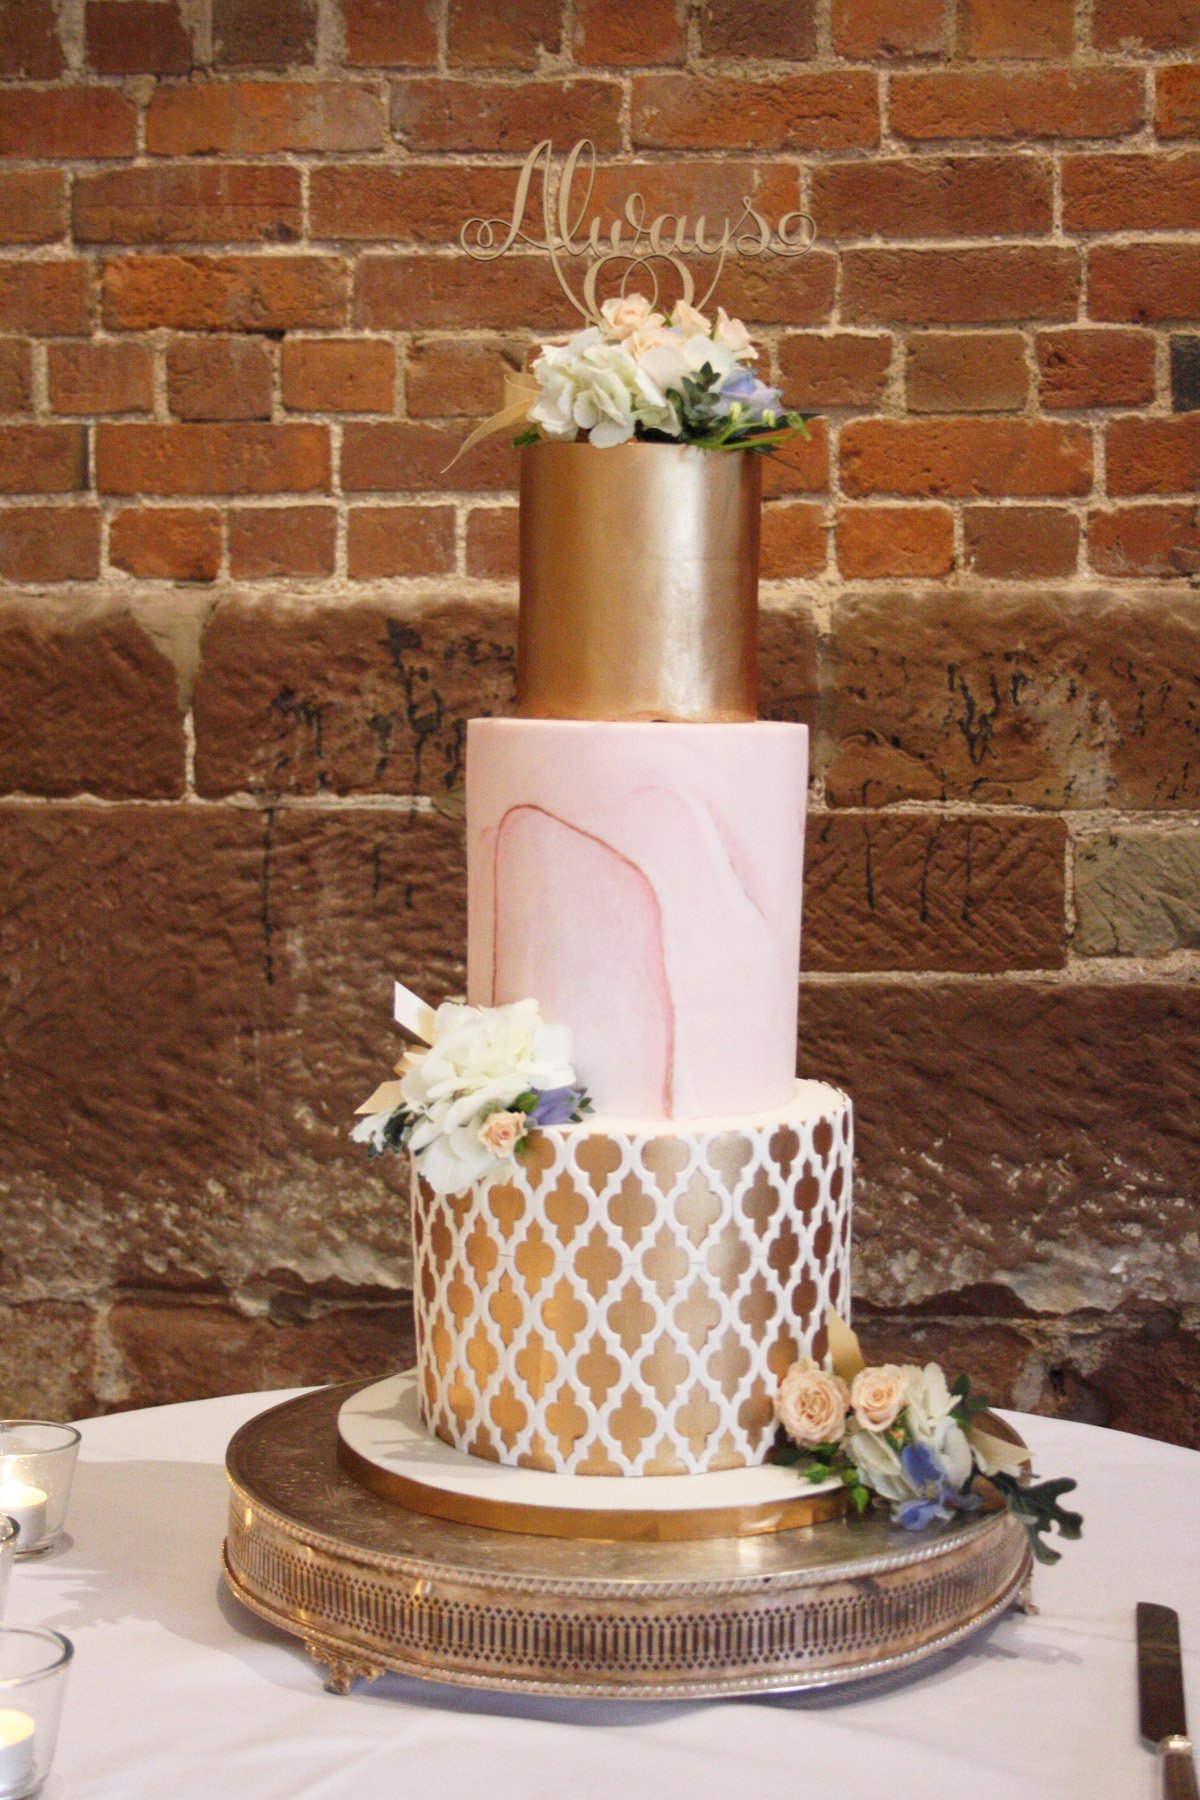 How much is a three tier wedding cake?